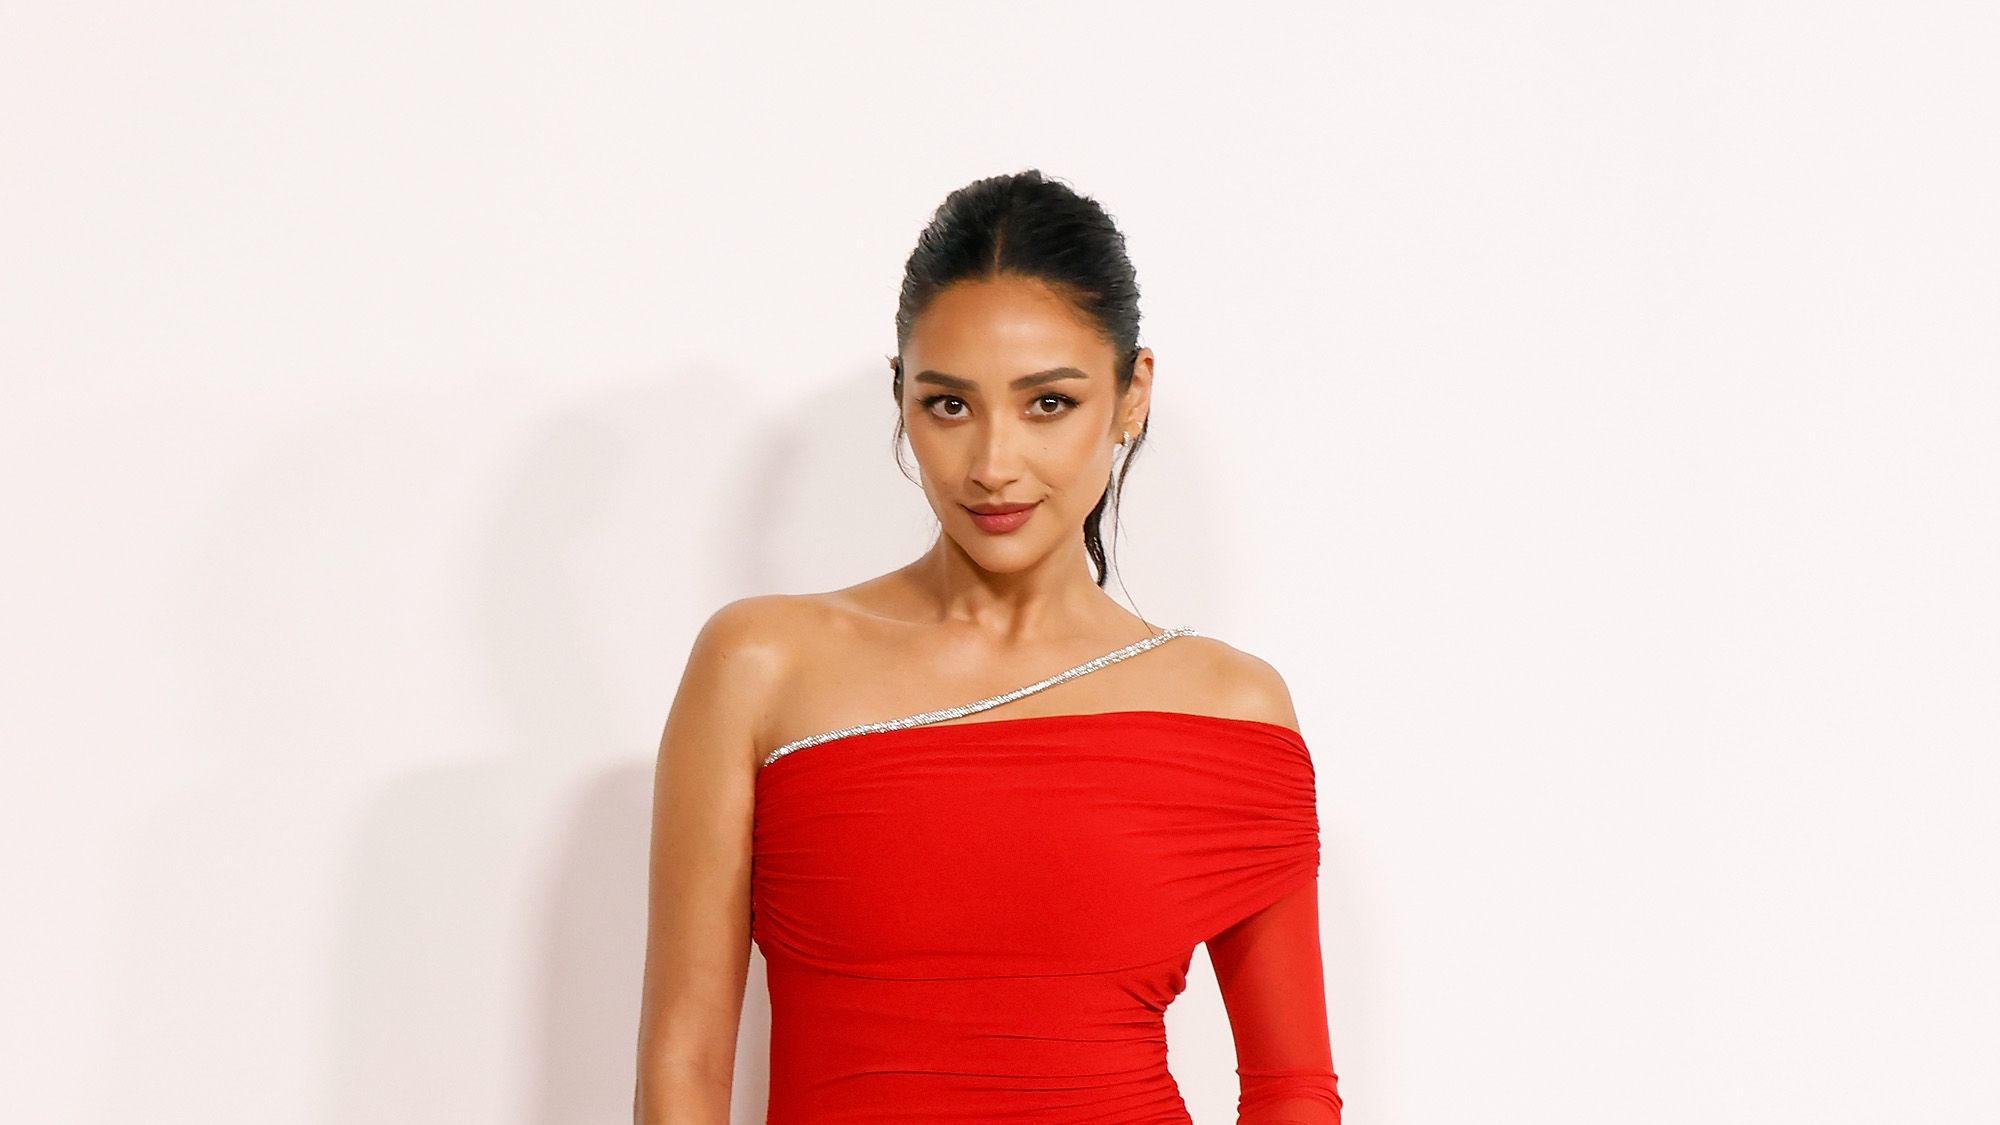 Bollywood actresses making heads turn on the red carpet in red dresses